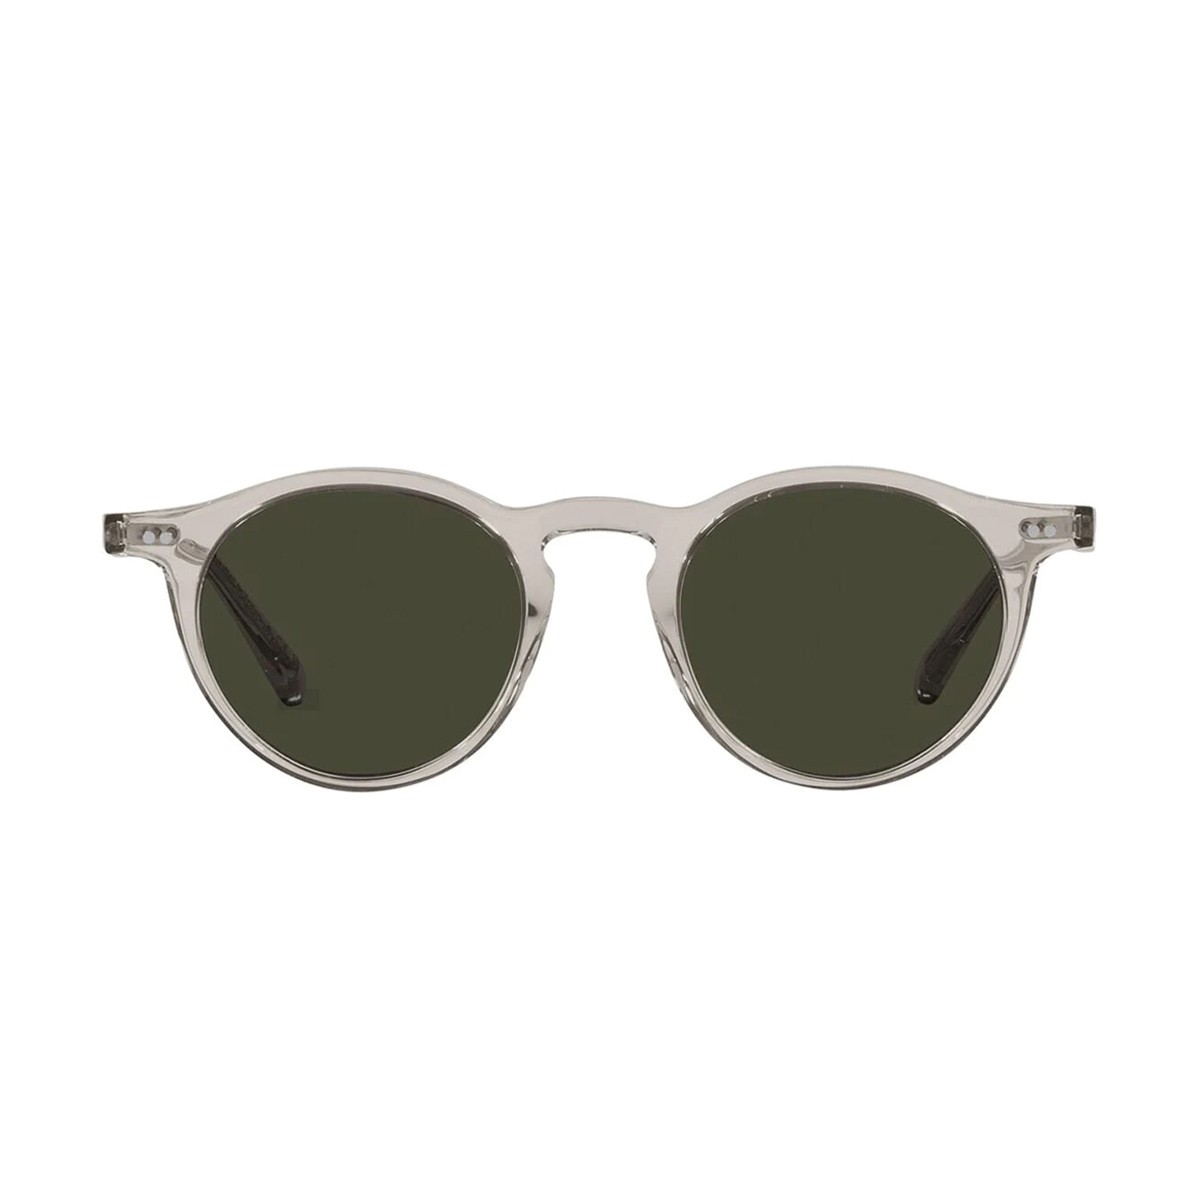 Authentic Oliver Peoples Sunglasses for Sale | Vision Express PH-mncb.edu.vn